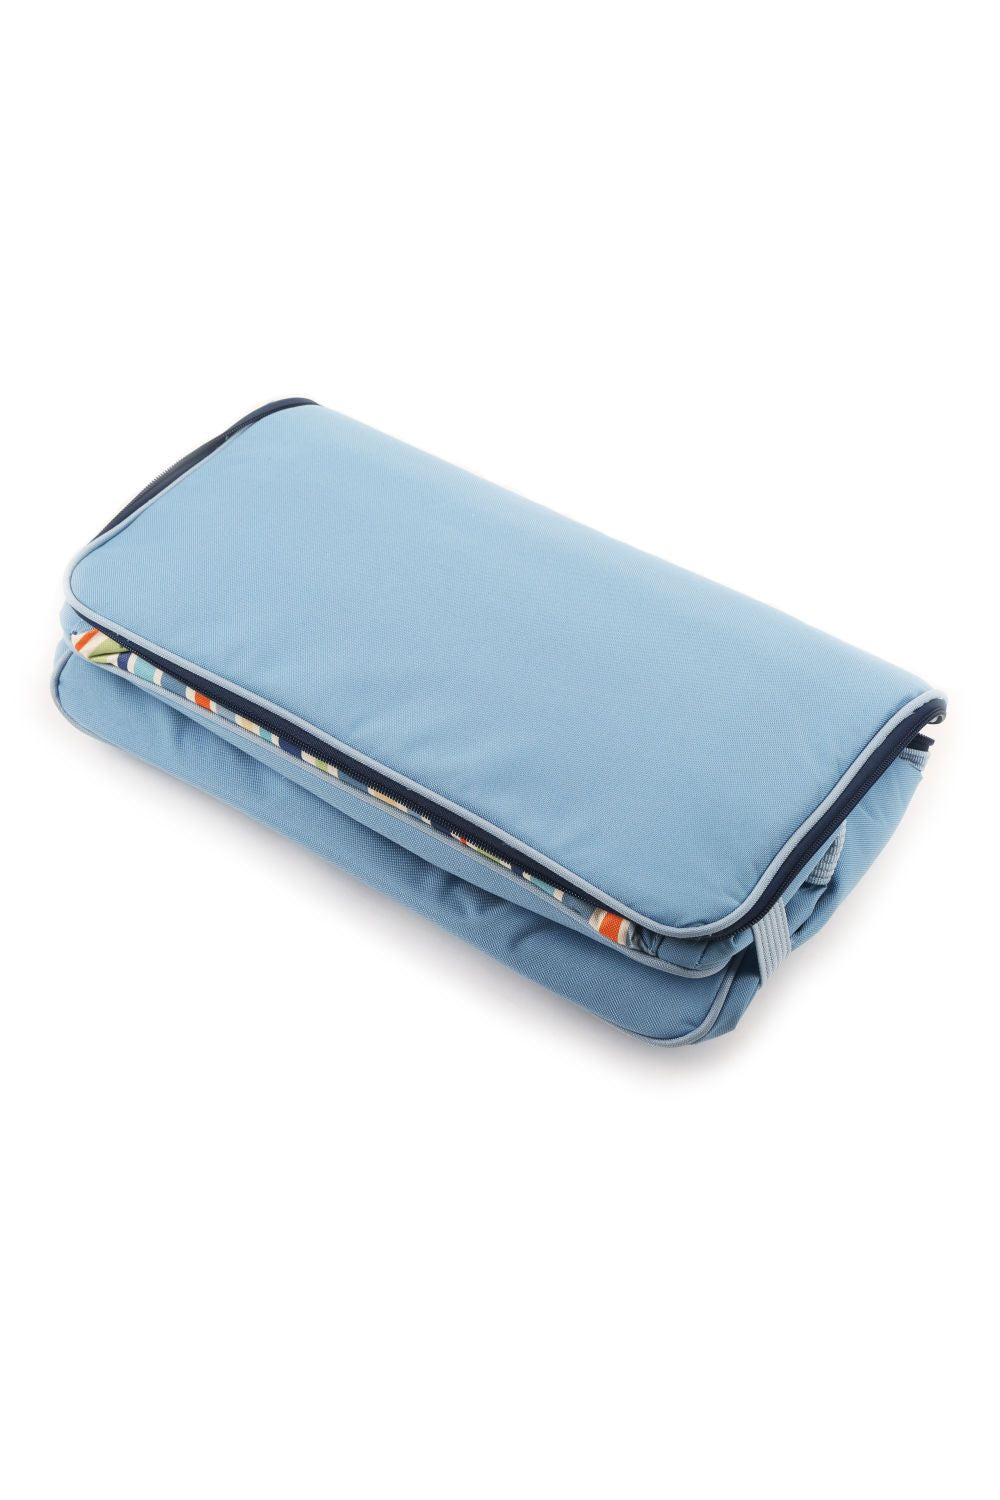 Greenfield Collection Foldable Family Picnic Cool Bag 30L - Sky Blue - Holiday Accent Ltd